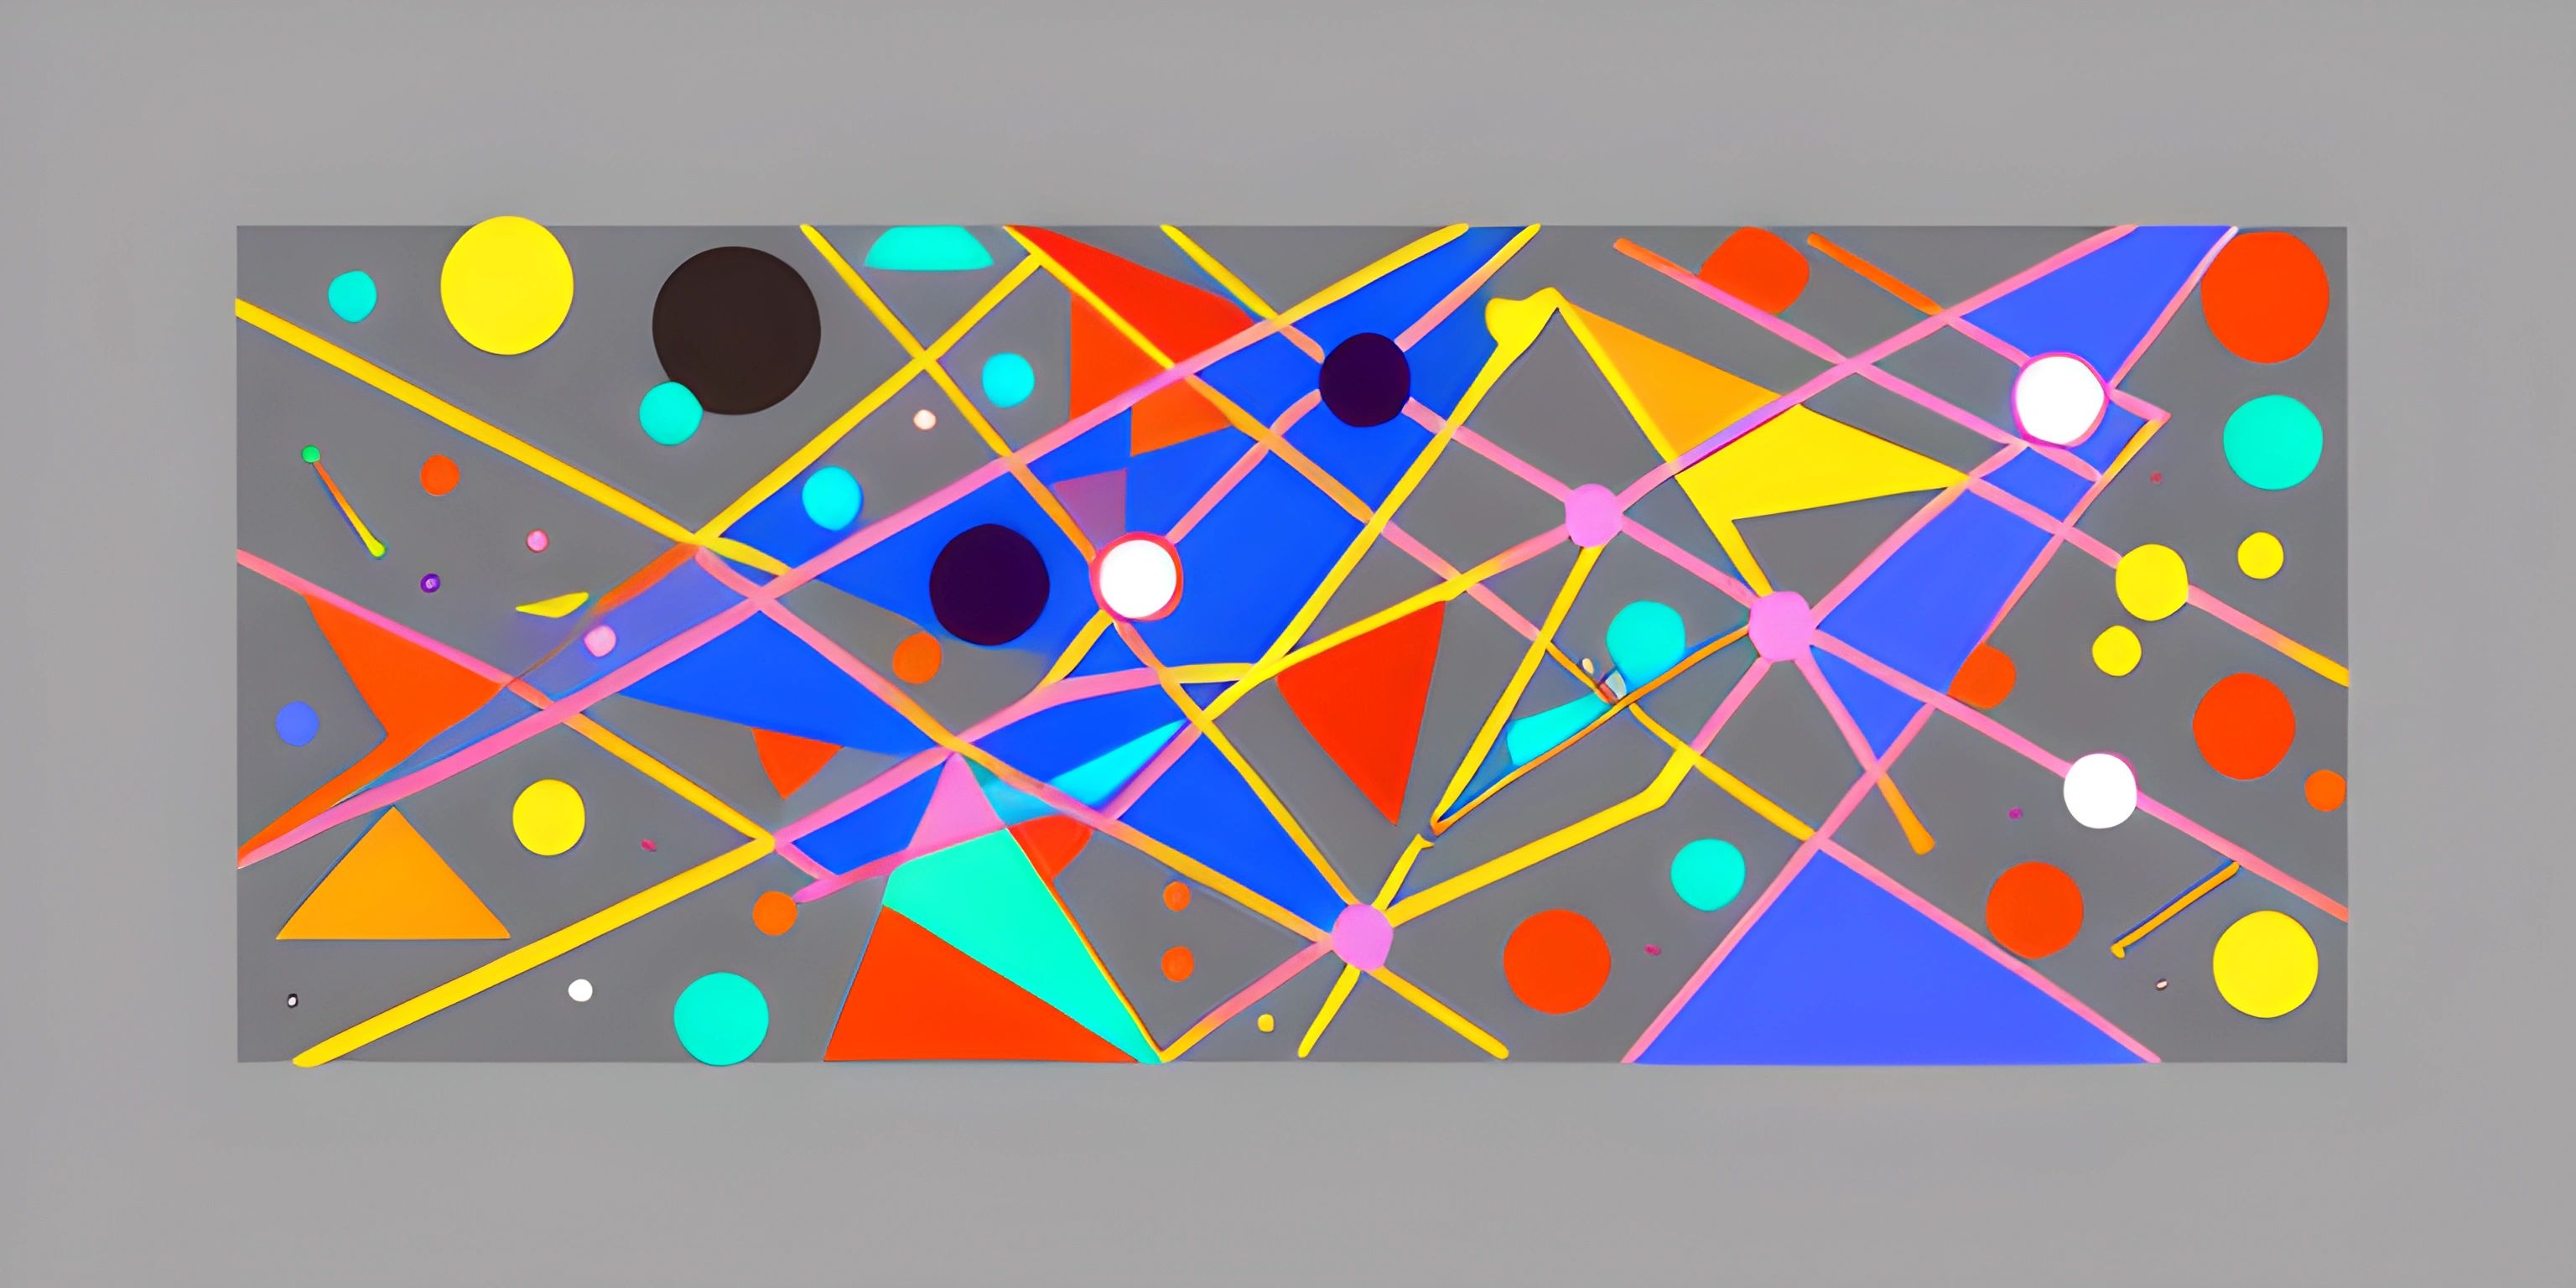 the painting depicts a multicolored piece of art that has geometric shapes on it